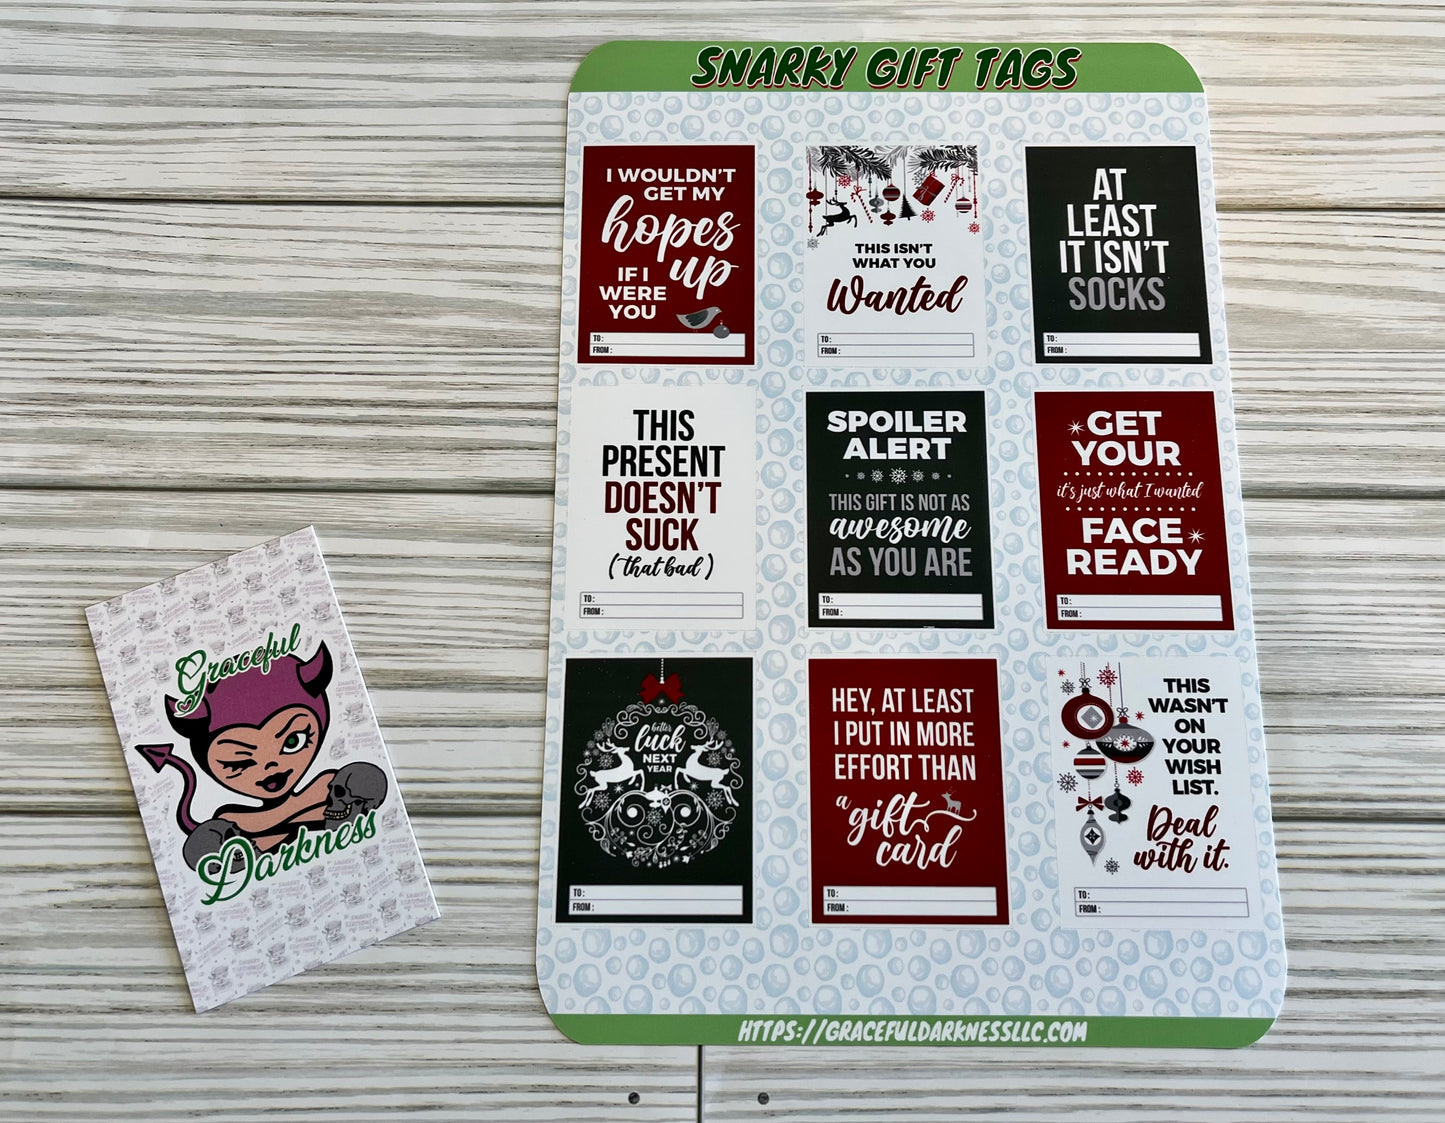 Snarky, Funny Gift Tags Sticker Sheet